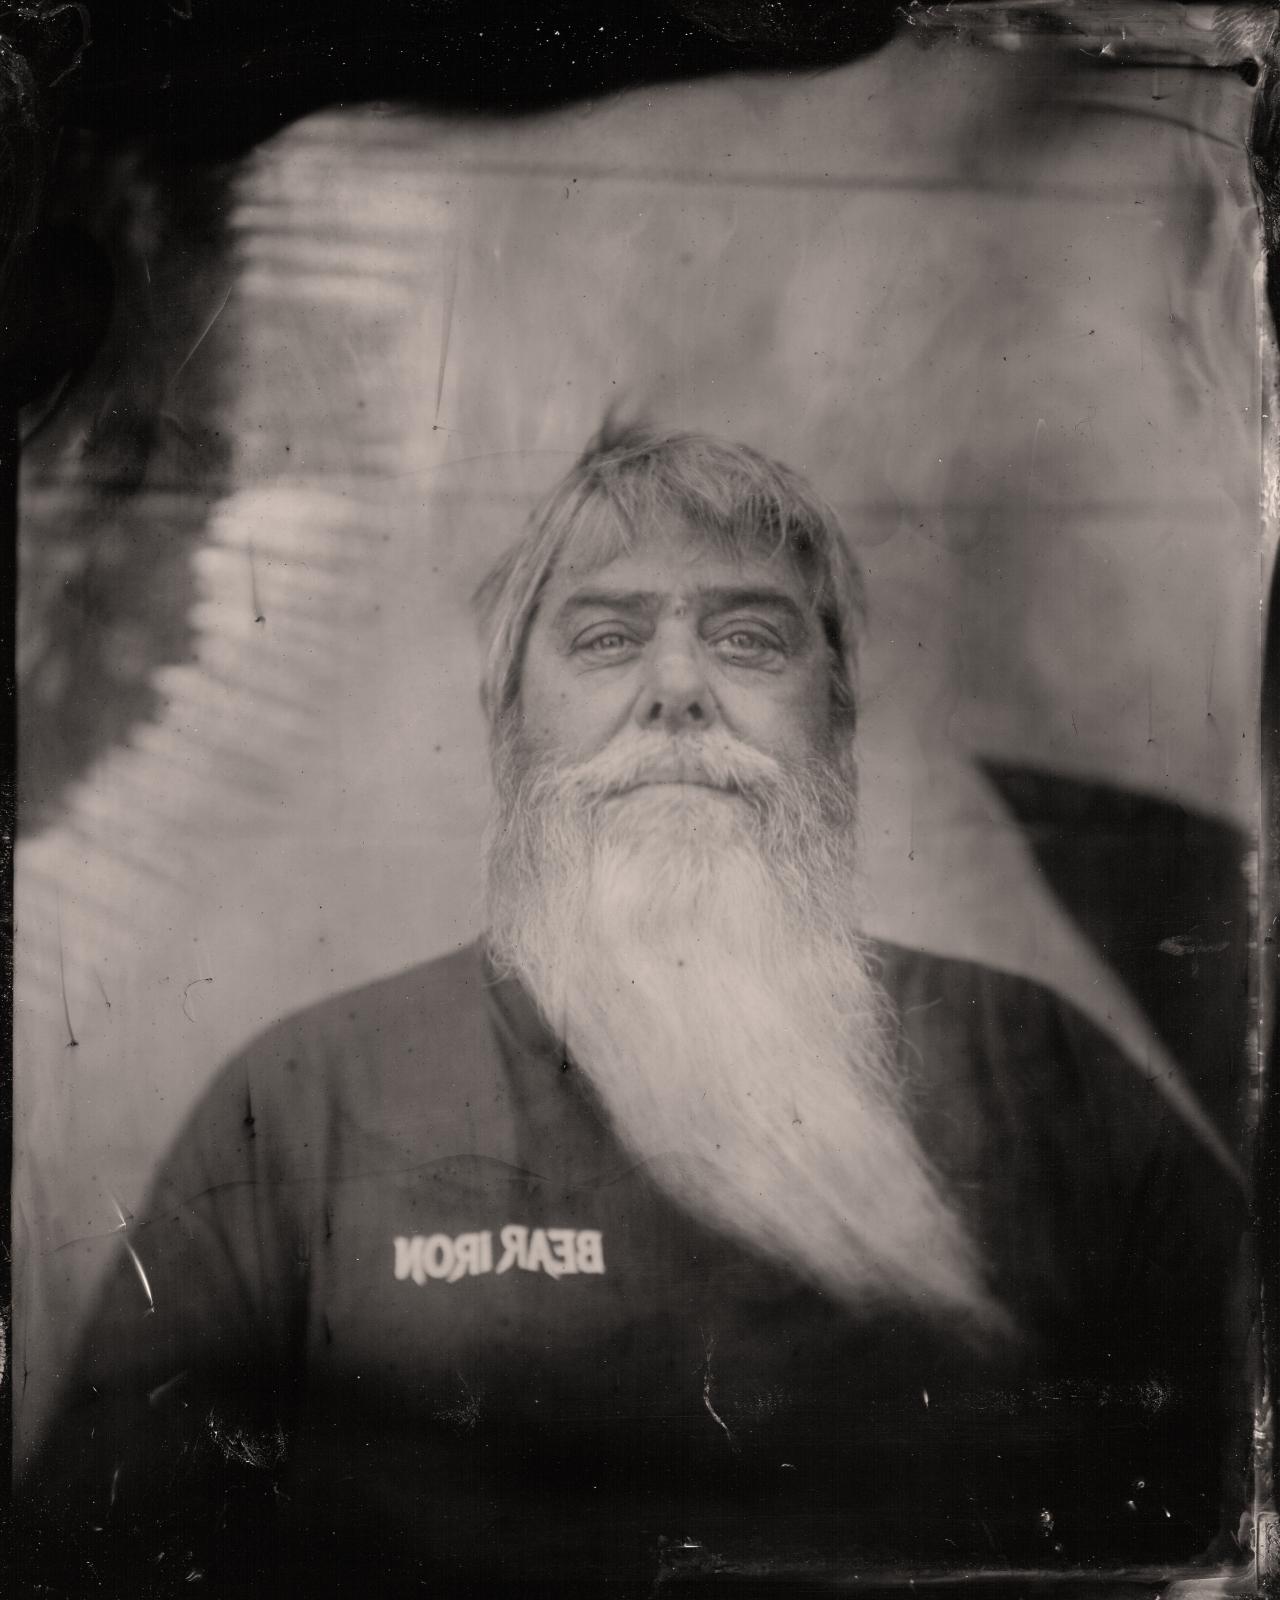 Tintype Portraits of Lane County Artists & Artisans Project Receives Grants and Exhibitions in Eugene Oregon